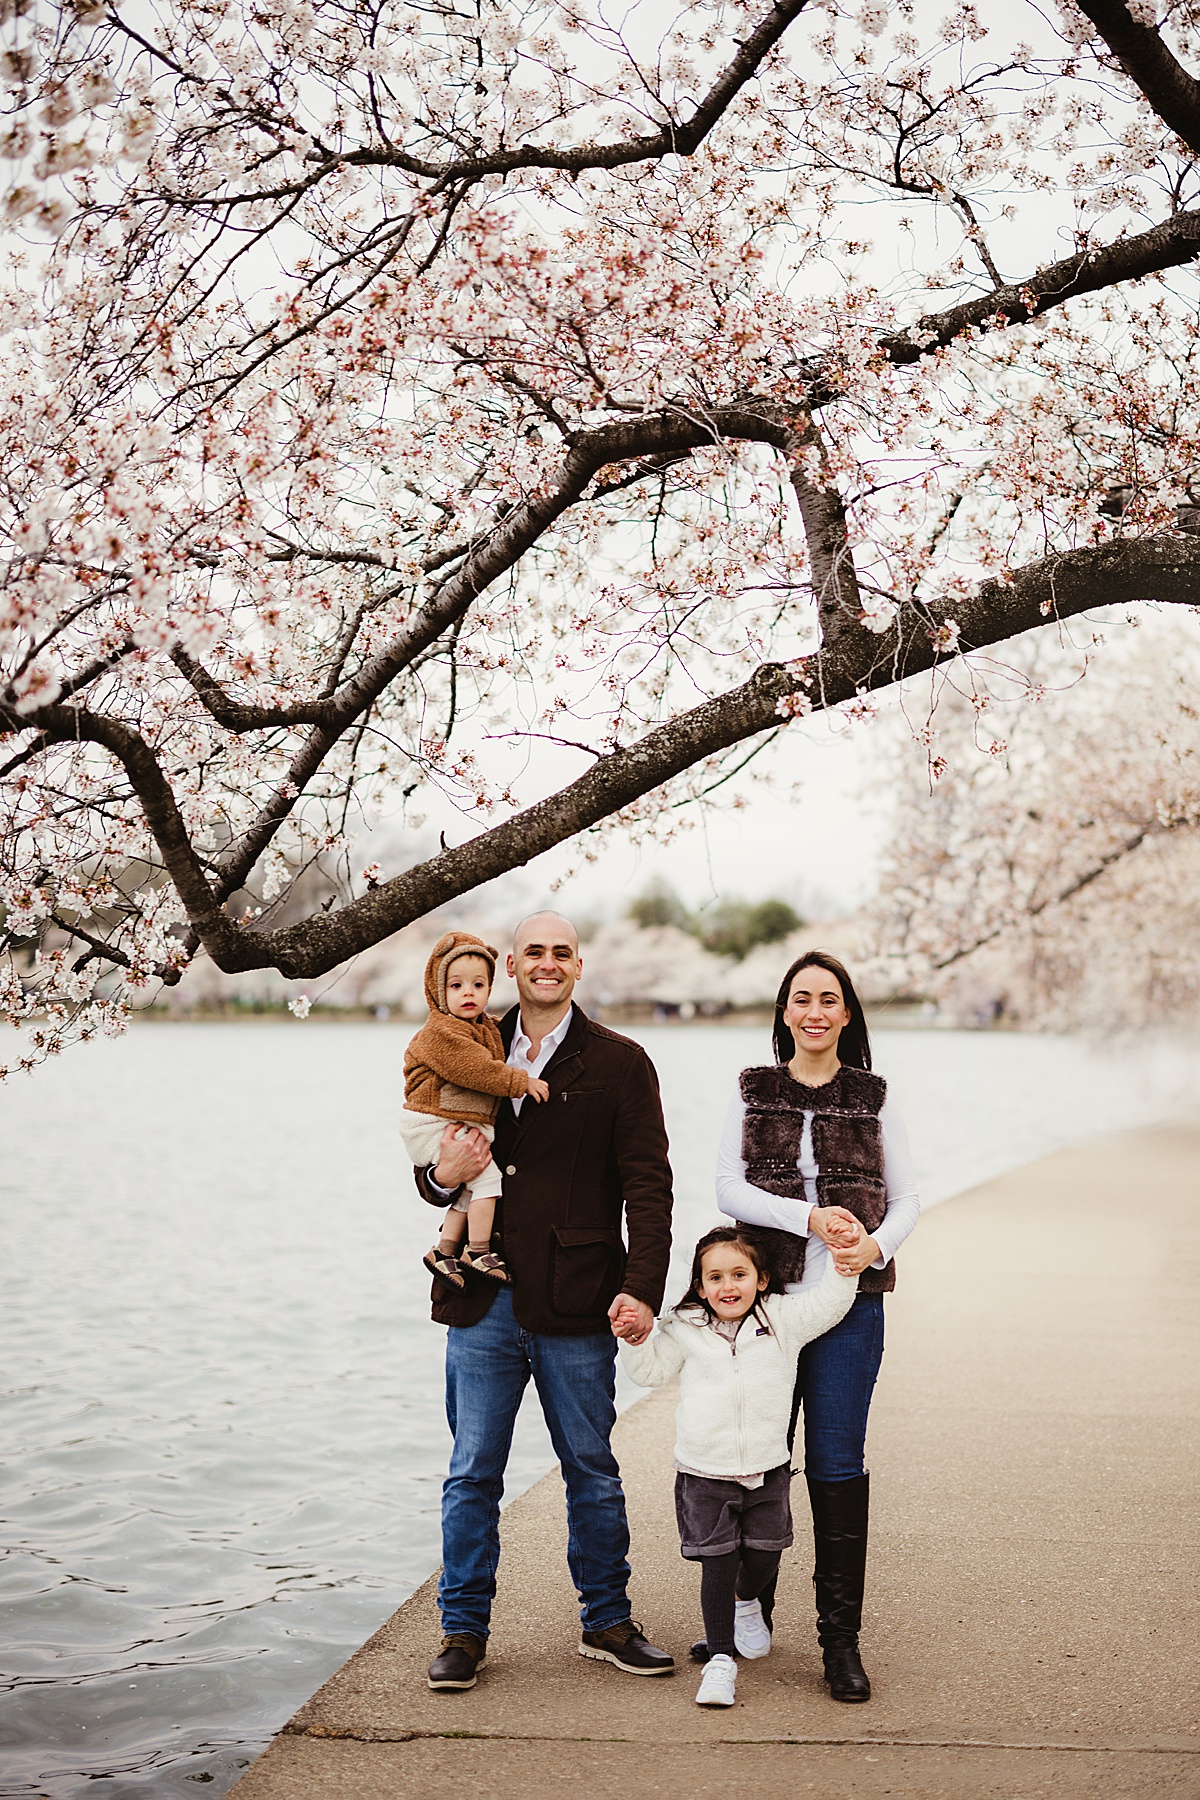 Family by Cherry Blossoms by Washington DC Family Photographer